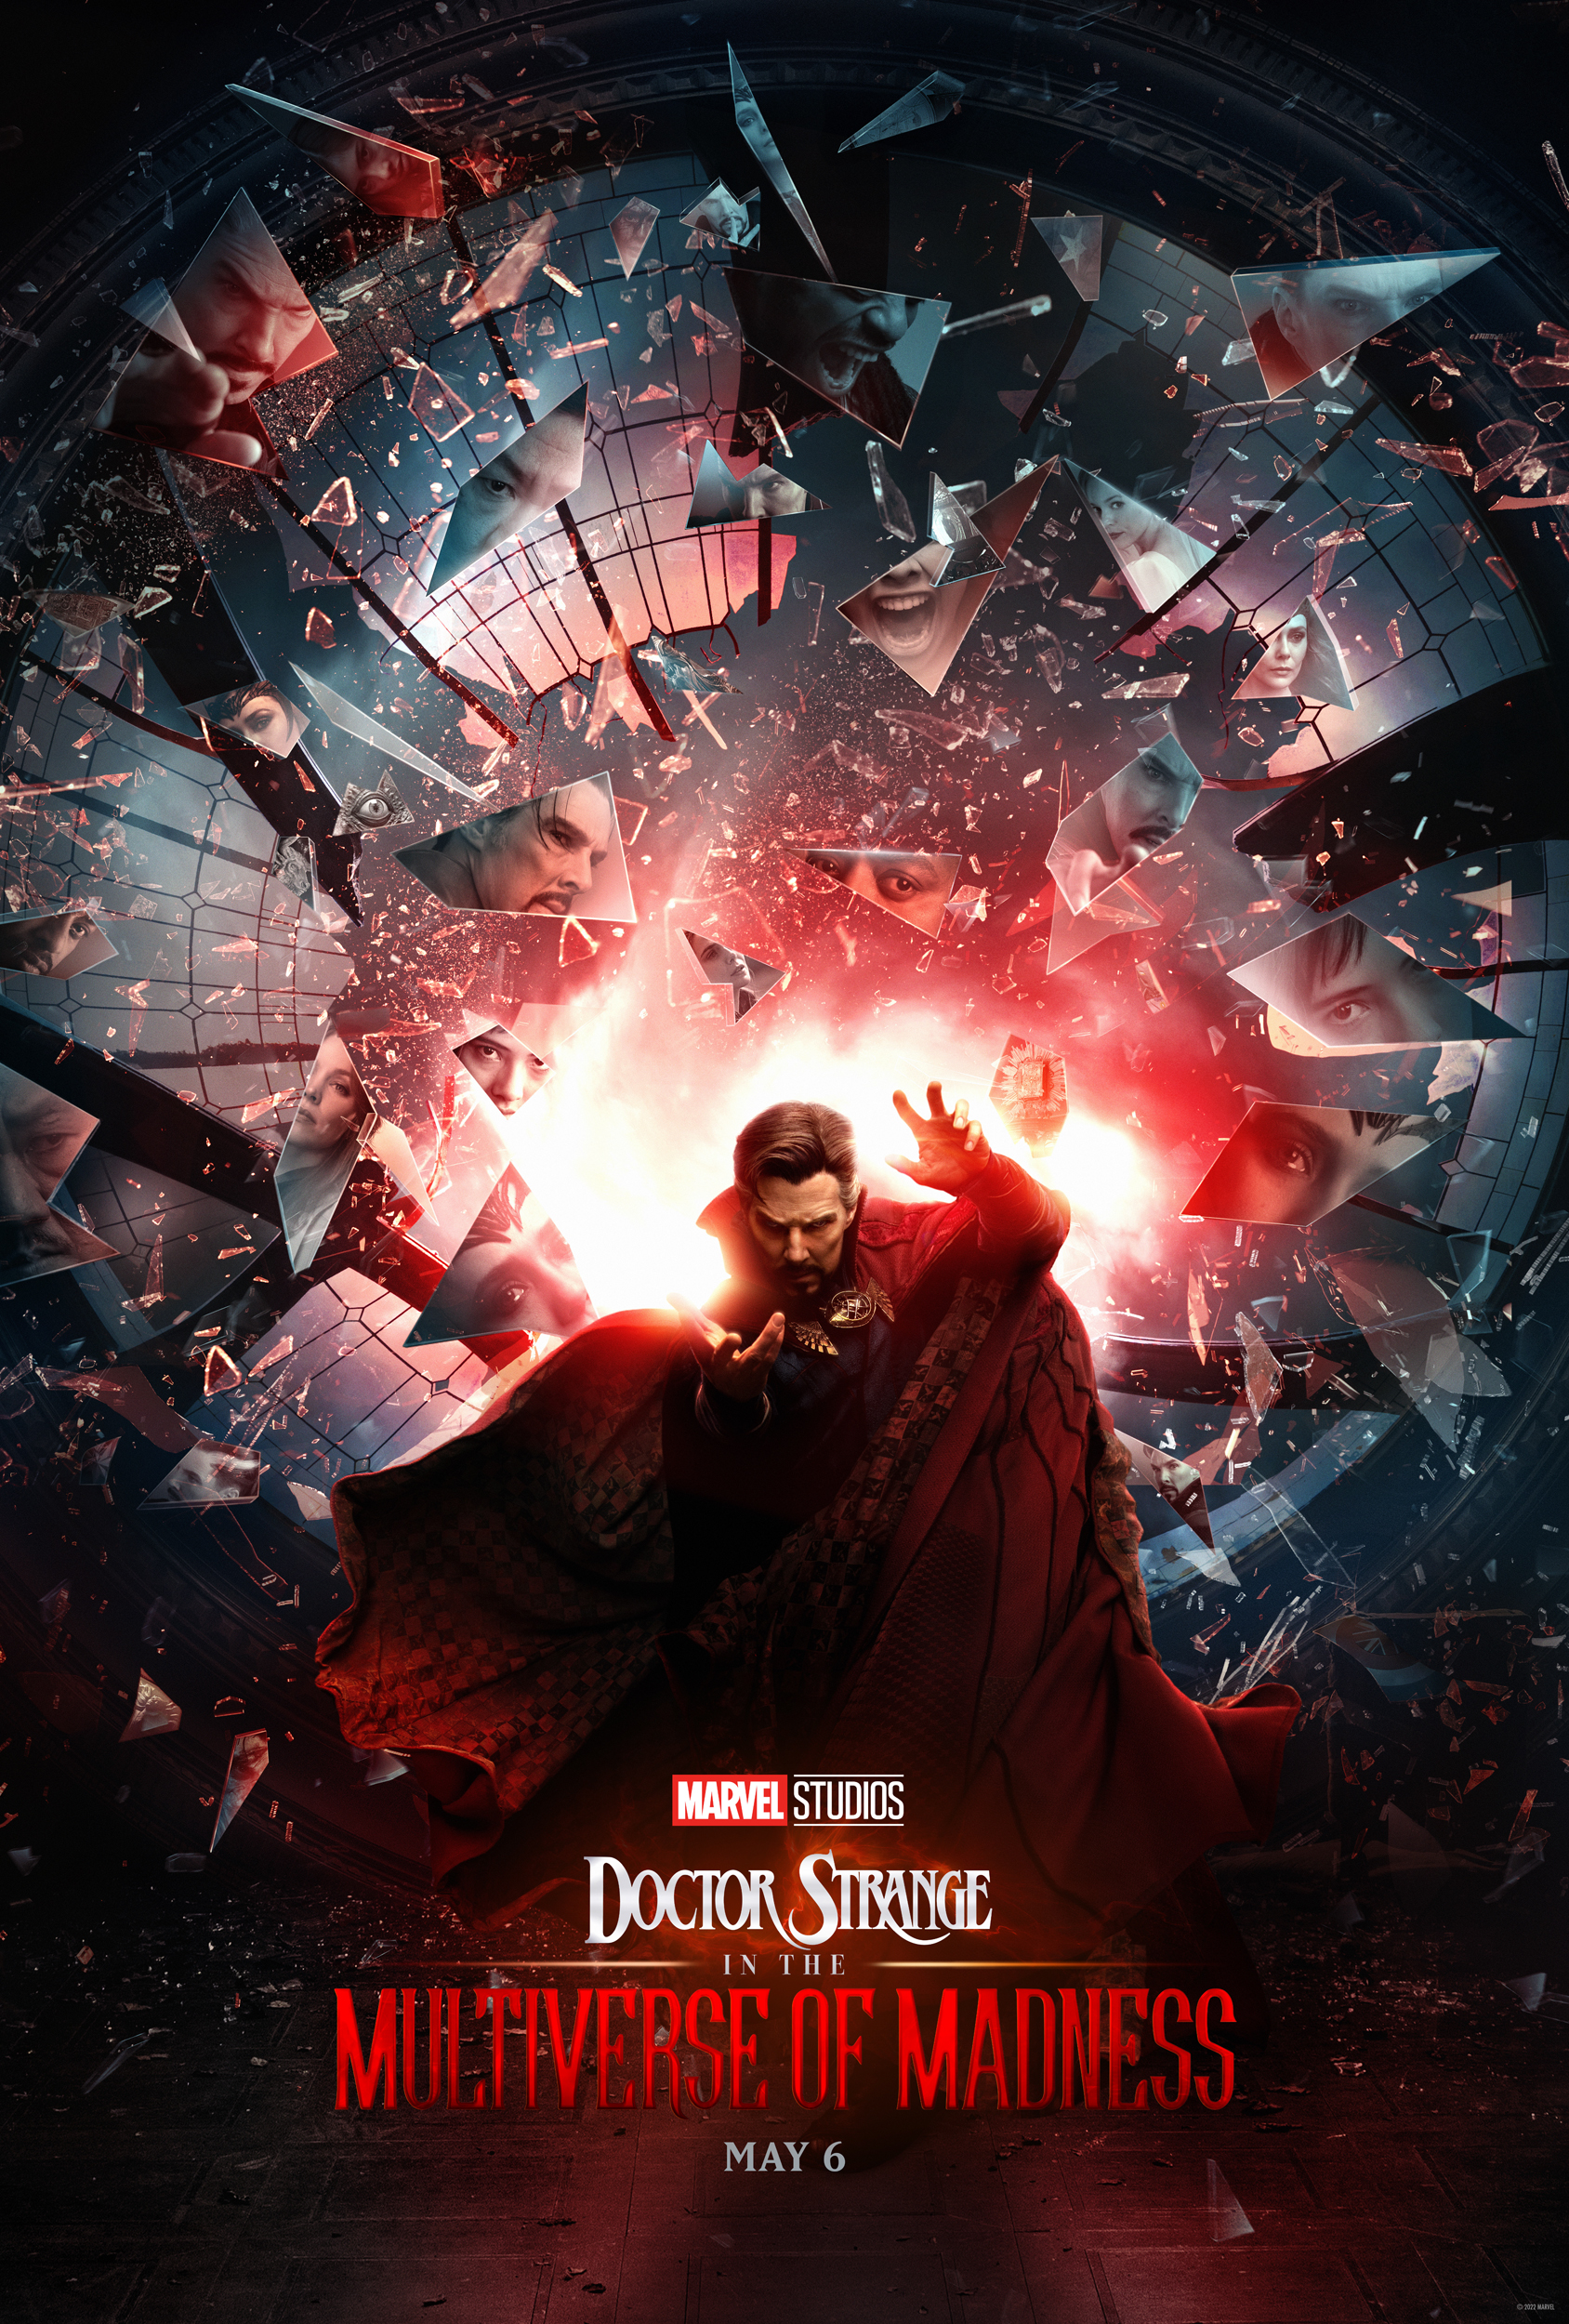 Doctor Strange In the Multiverse Of Madness Runtime Revealed